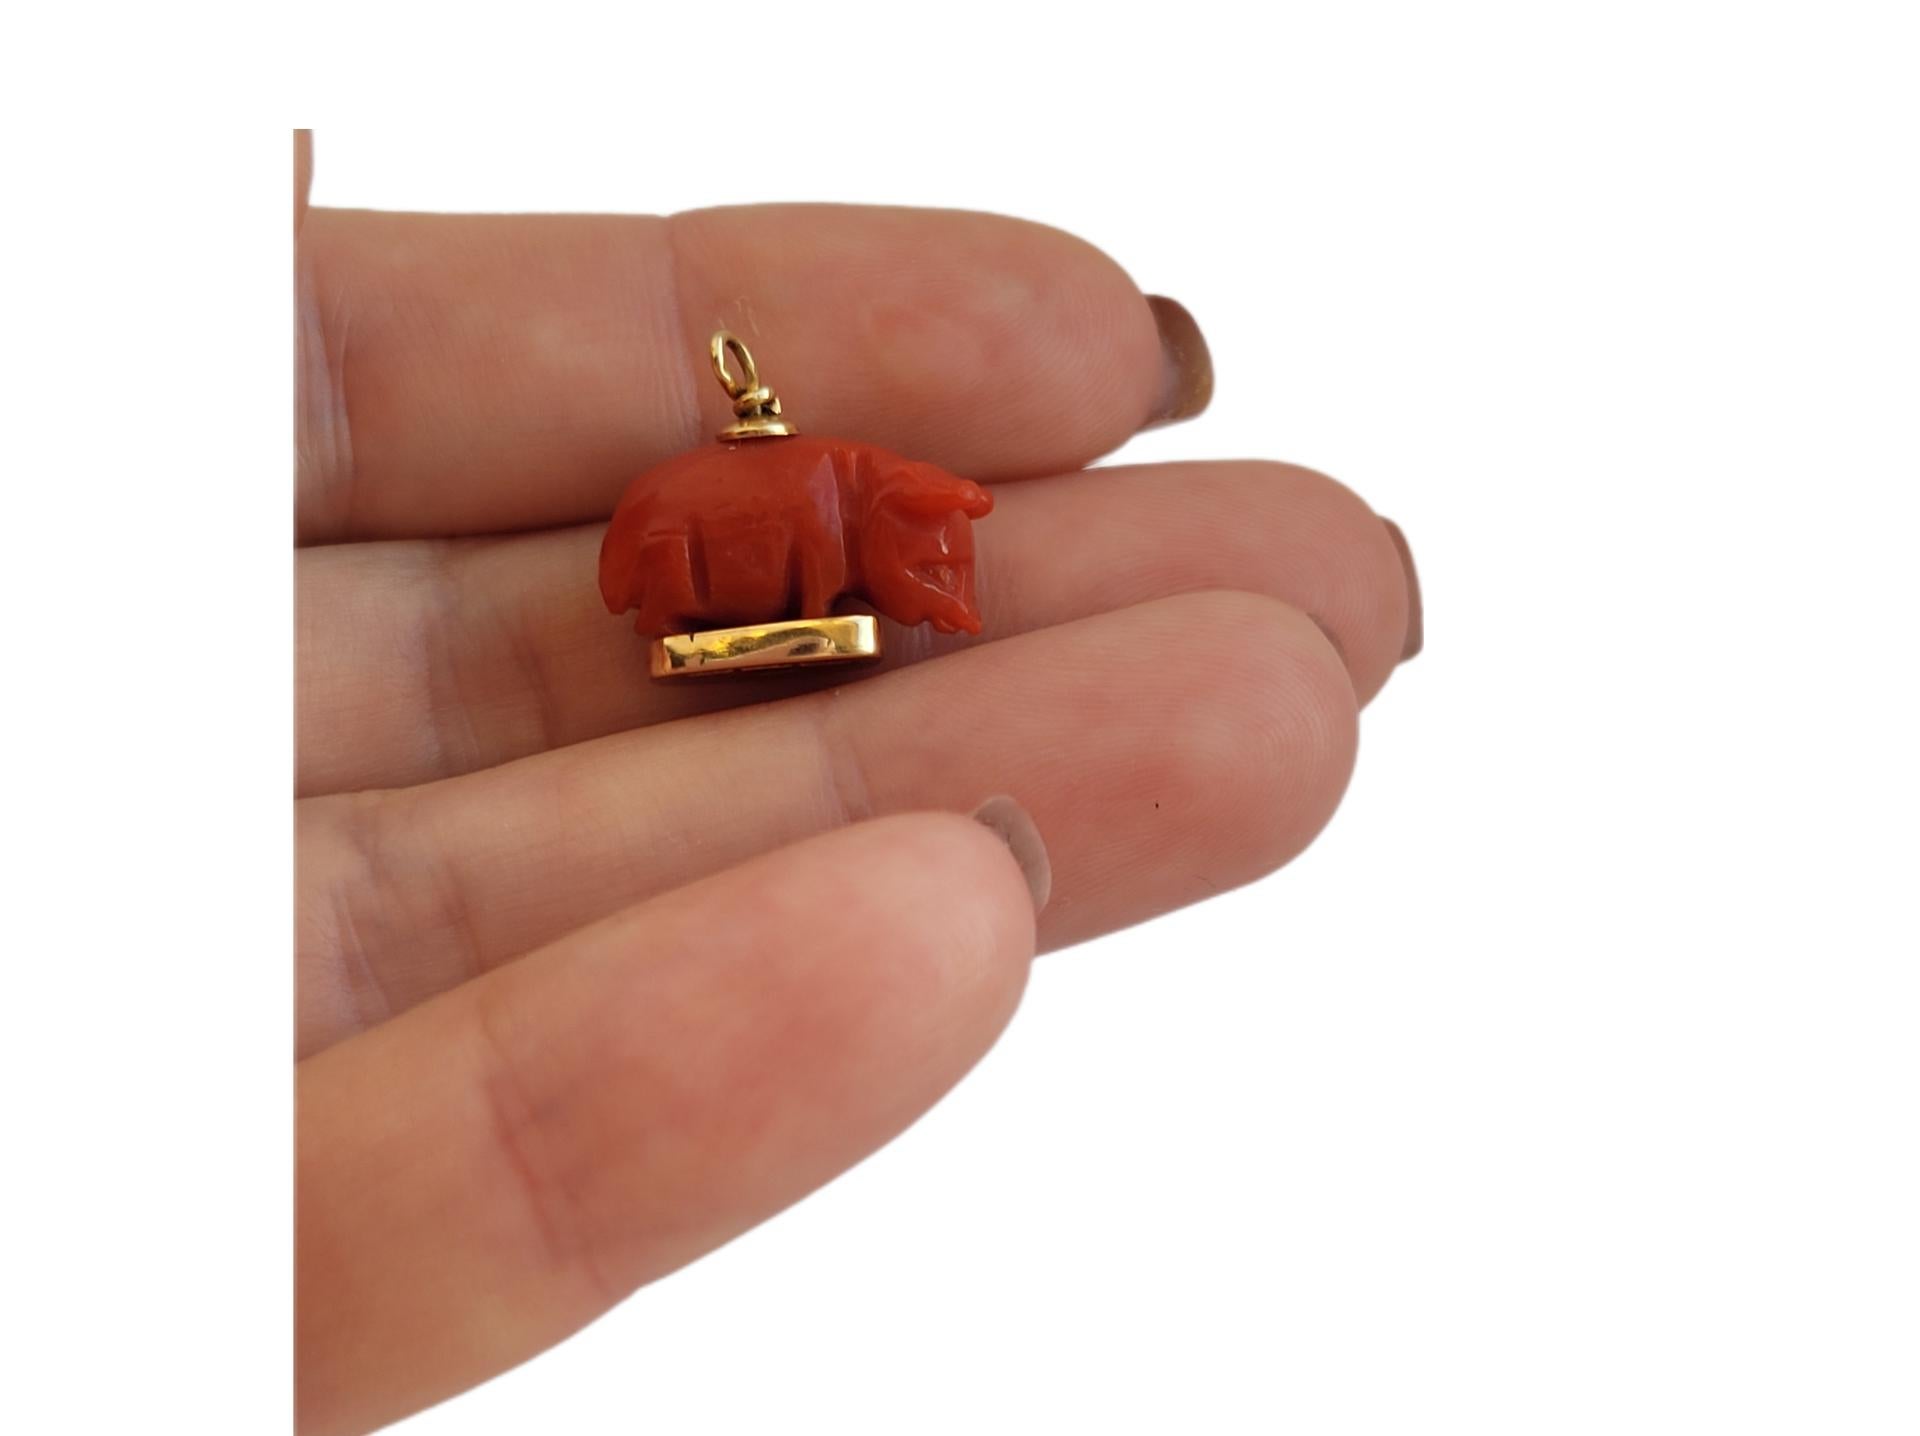 A Cute 18 Karat Gold and carved Sardinian Coral Lucky Pig Charm / Pendant / Fob. Italian origin.

Height including jump ring 16mm, width 15mm.

Full Italian hallmark for 18 Karat Gold.

The charm in very good condition and ready to wear. Perfect as